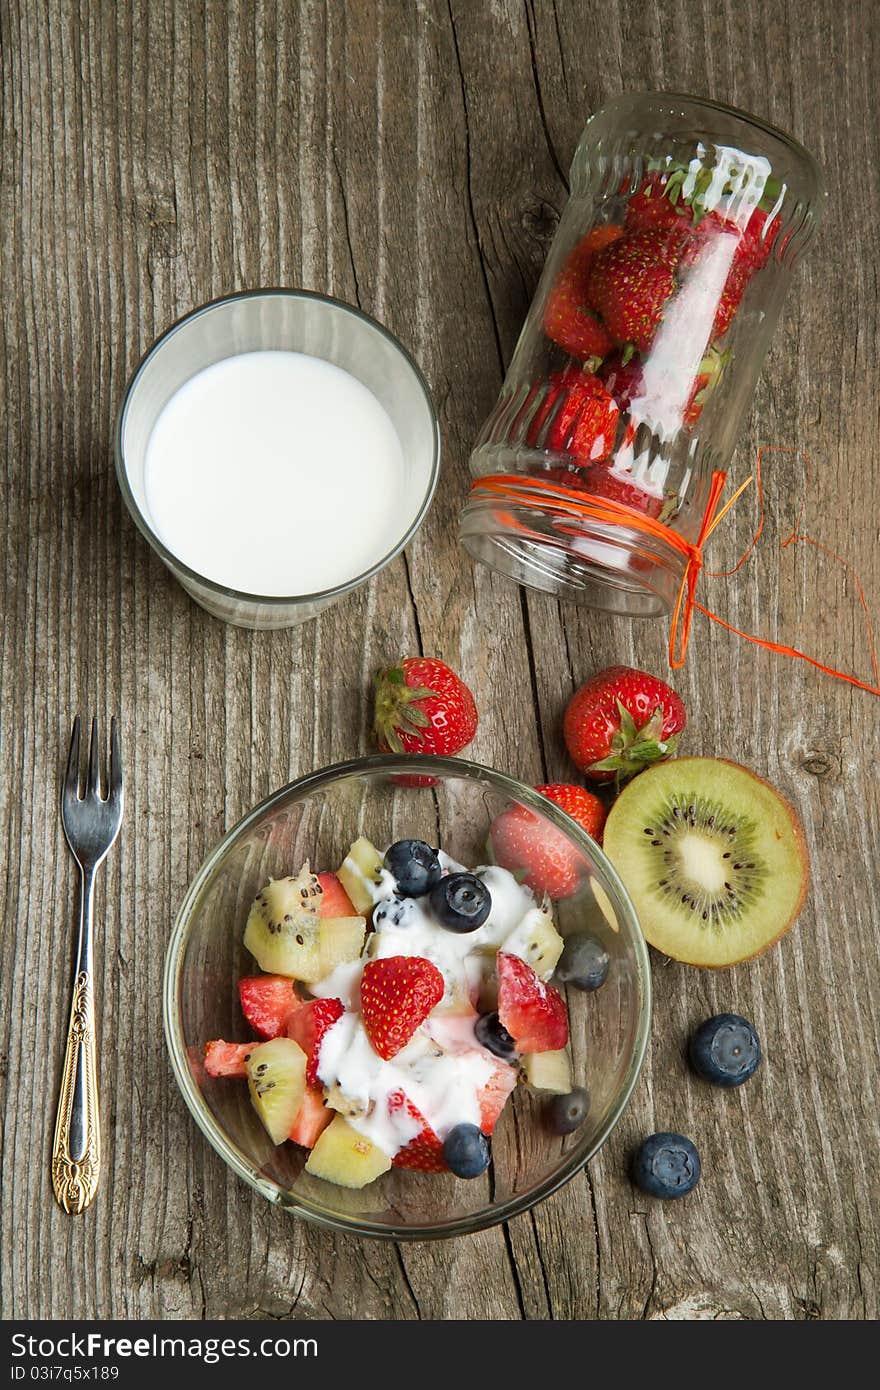 Top view on bowl of fruit salad with fresh strawberries, blueberries and kiwi with glass of milk on old wooden table table. Top view on bowl of fruit salad with fresh strawberries, blueberries and kiwi with glass of milk on old wooden table table